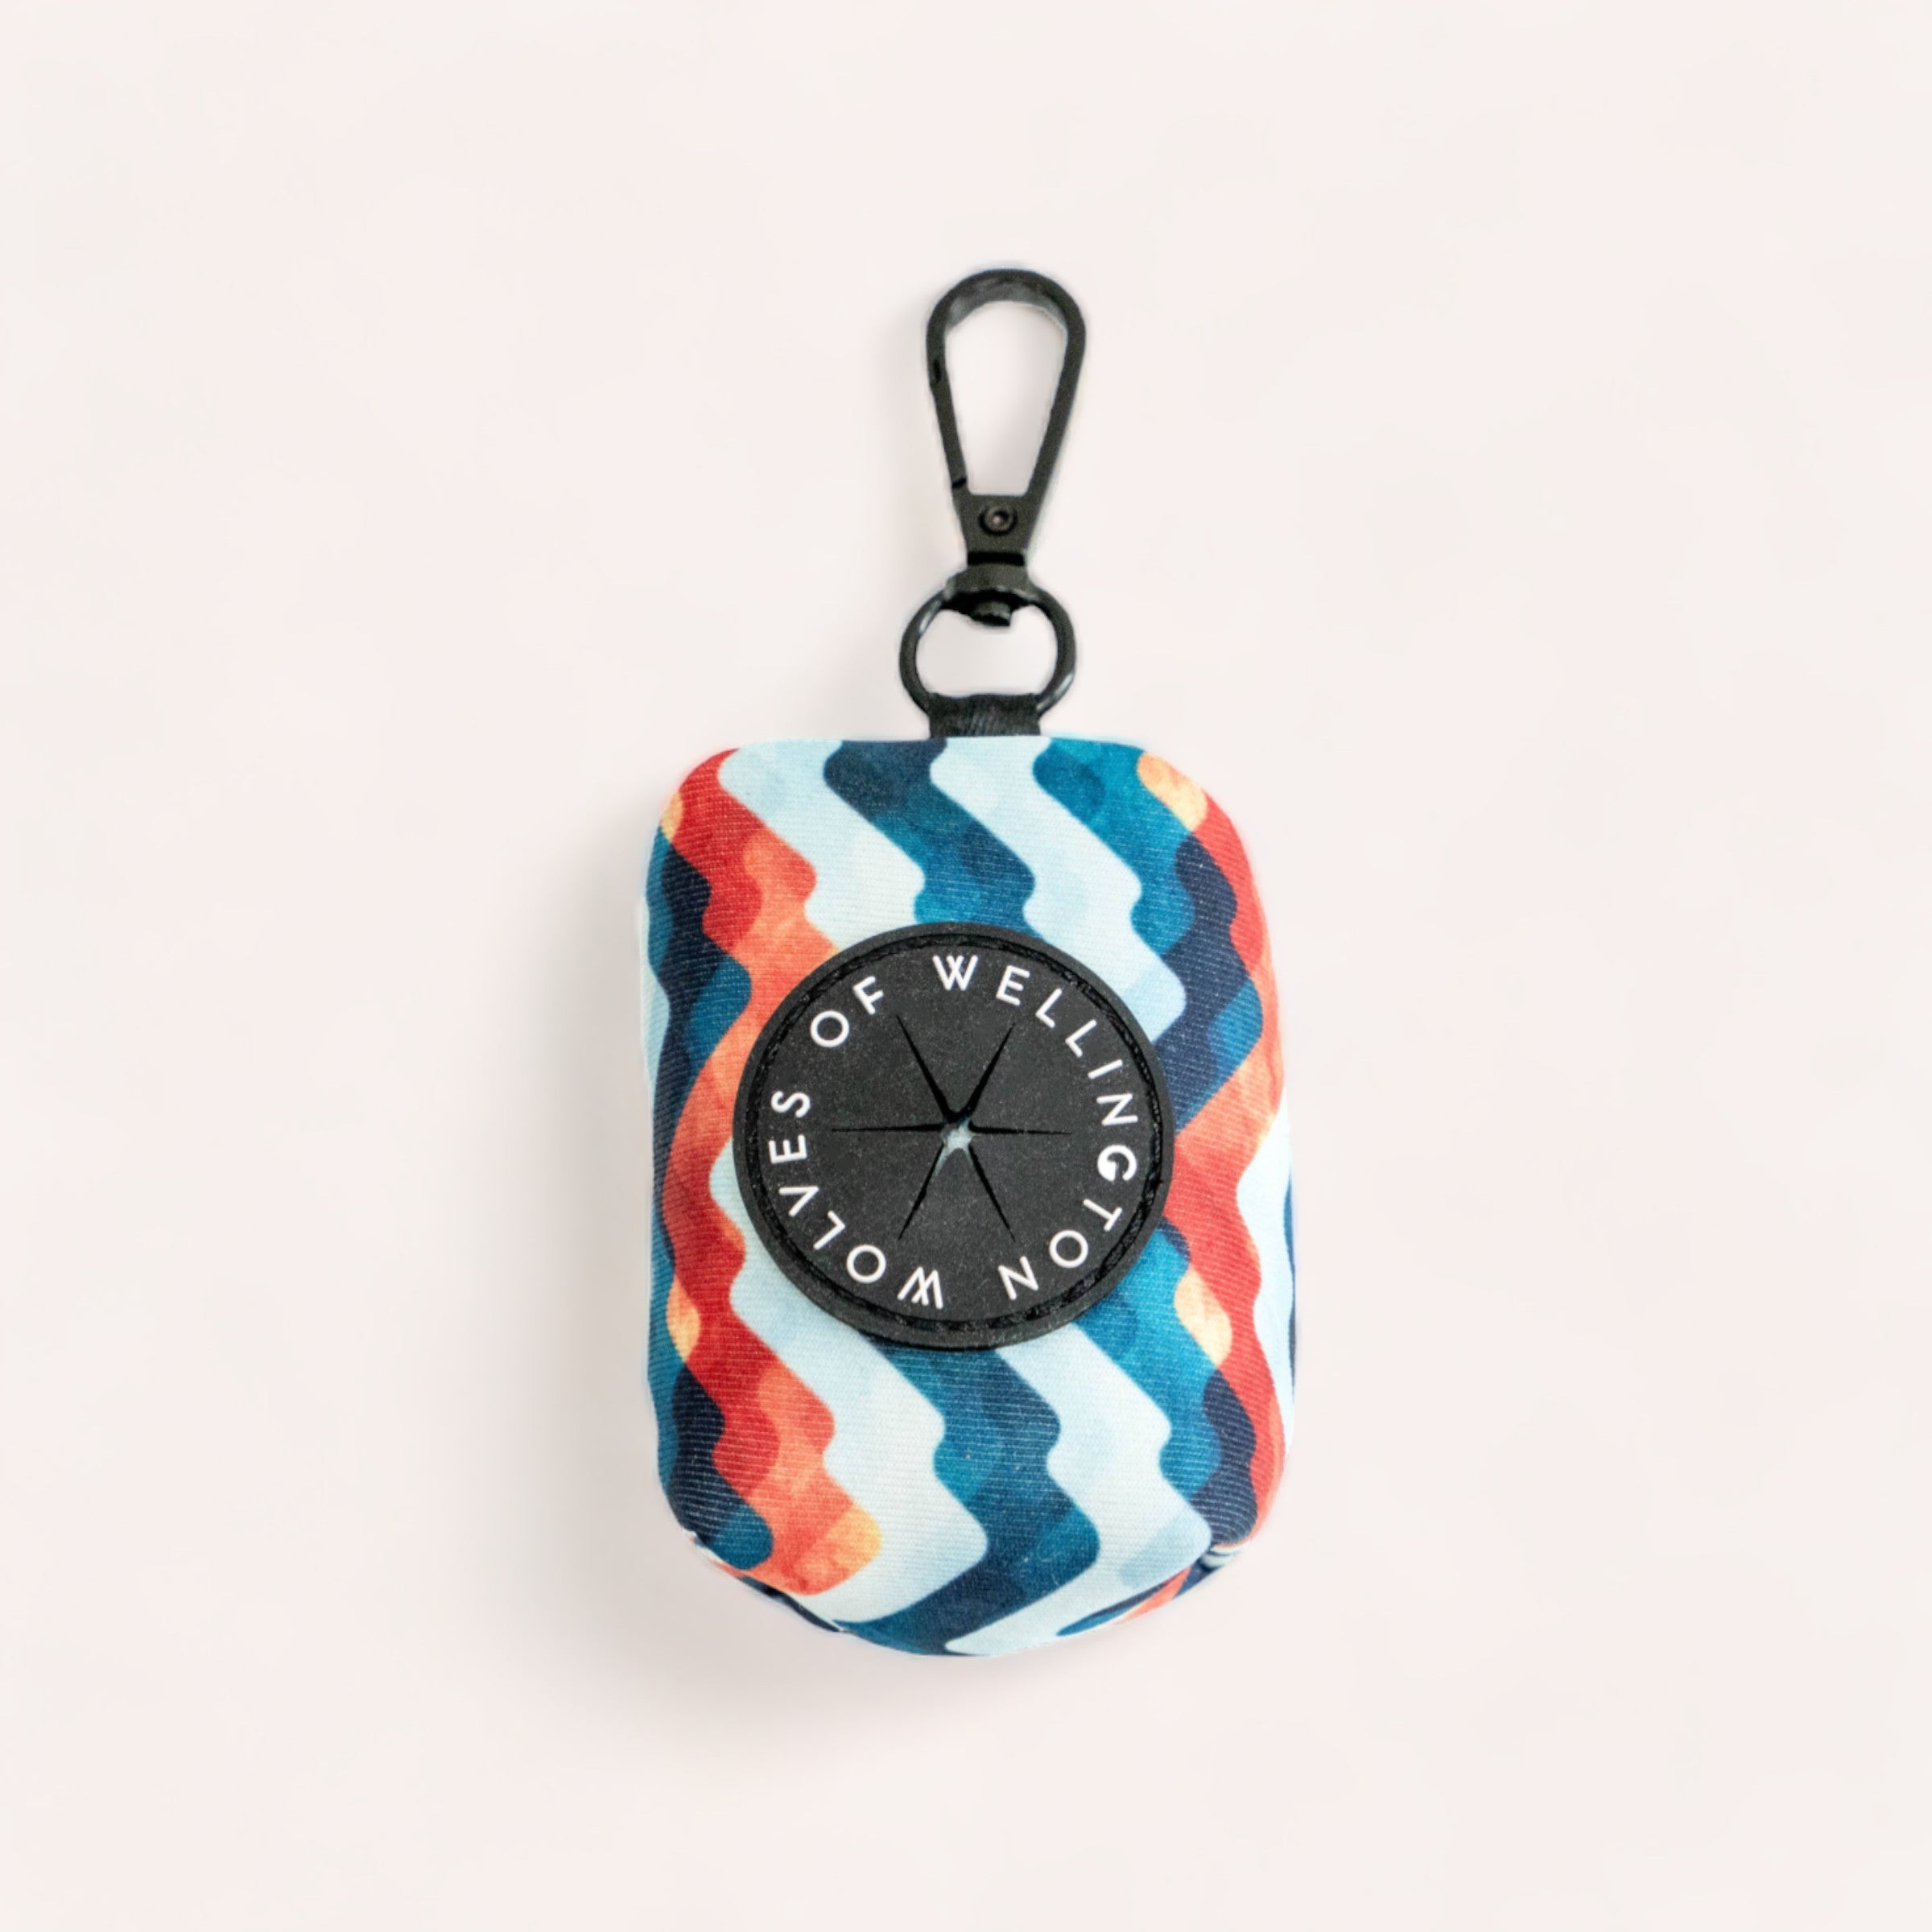 A colorful striped Maverick Poop Pouch with a compass design in the center, designed for holding dog poop bags, and a carabiner attached, lying on a plain background by Wolves of Wellington.